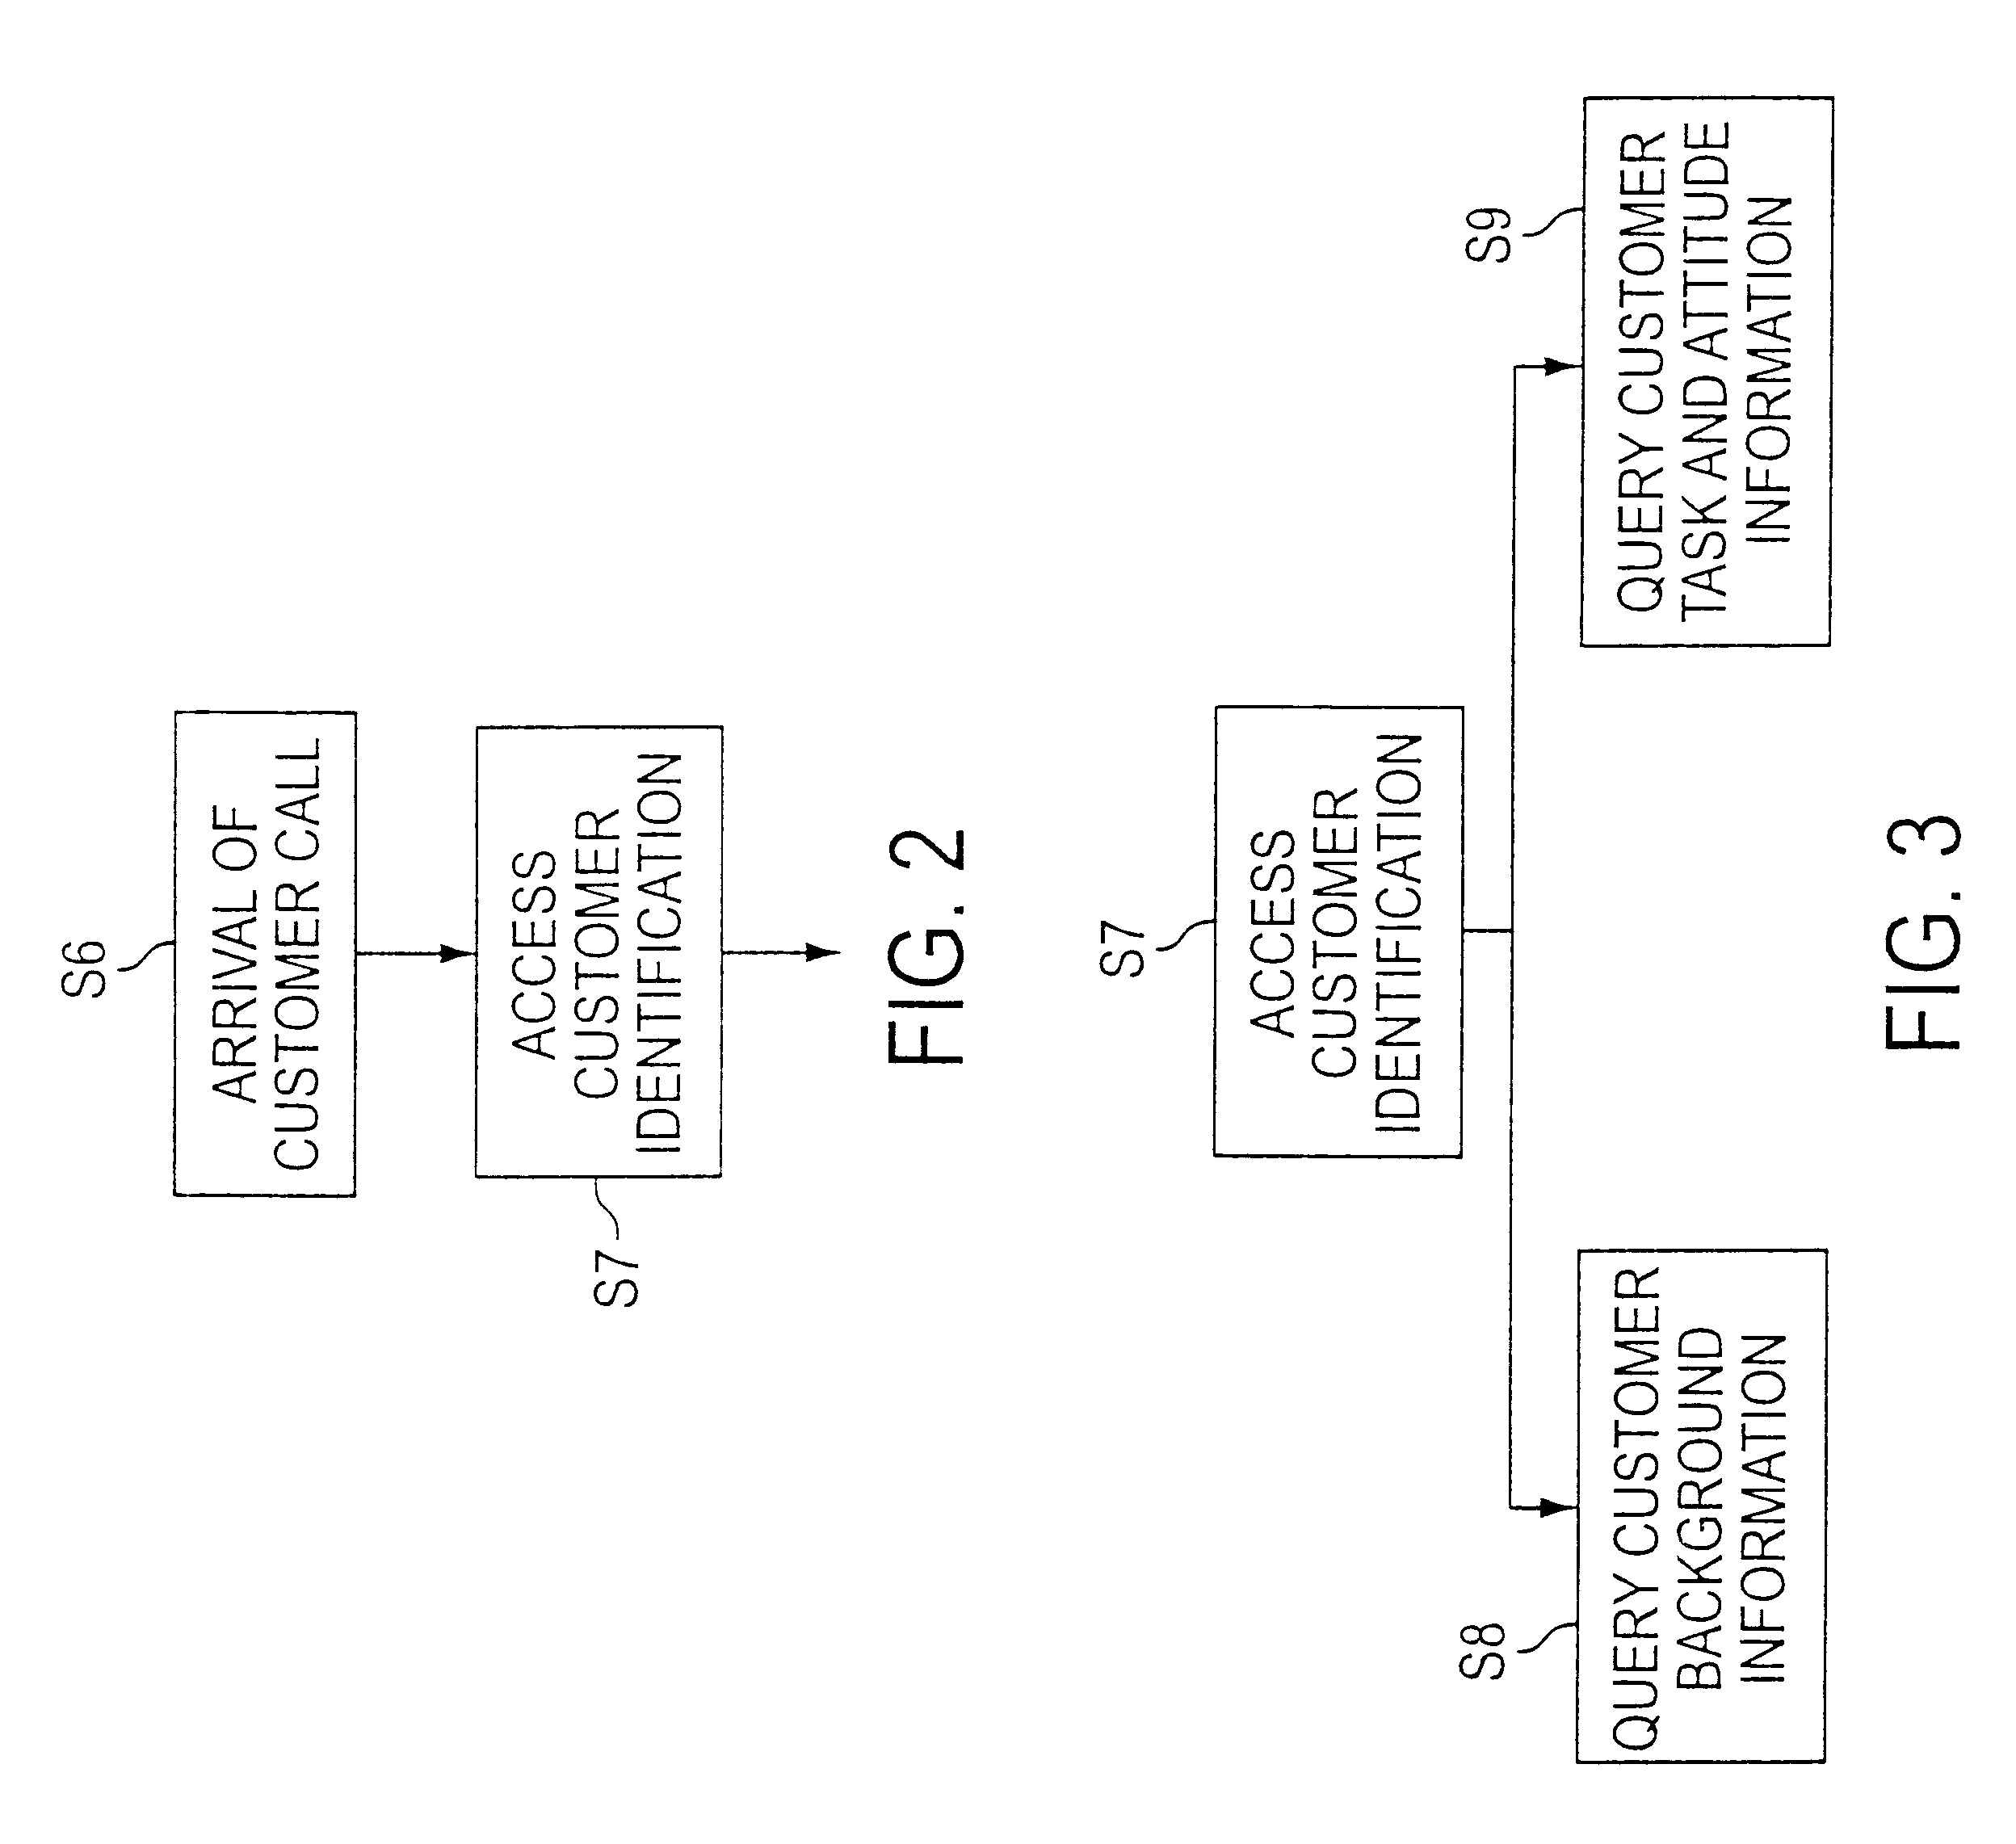 System and methods for intelligent routing of customer requests using customer and agent models